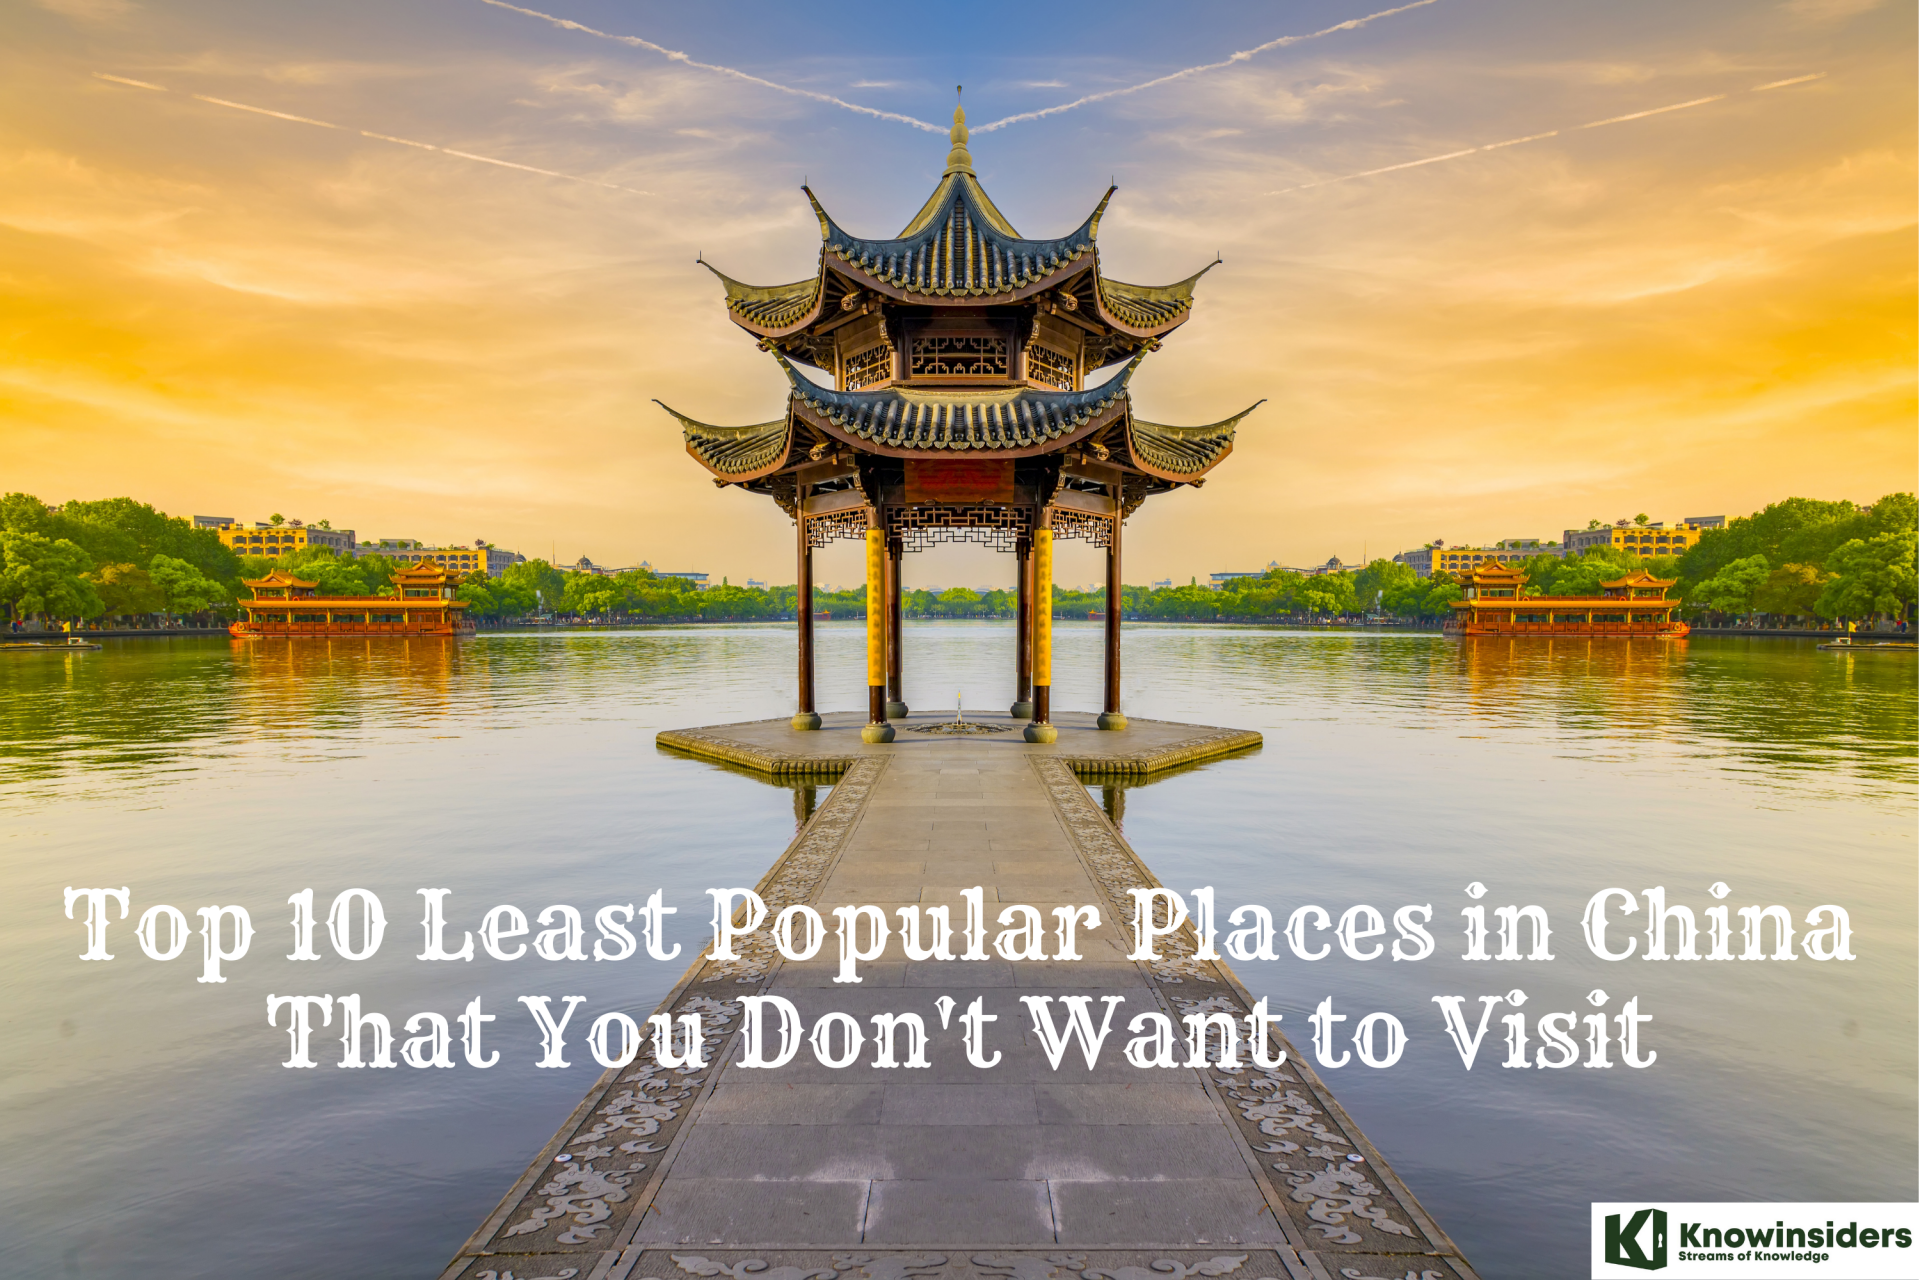 Top 10 Least Popular Places in China That You Don't Want to Visit